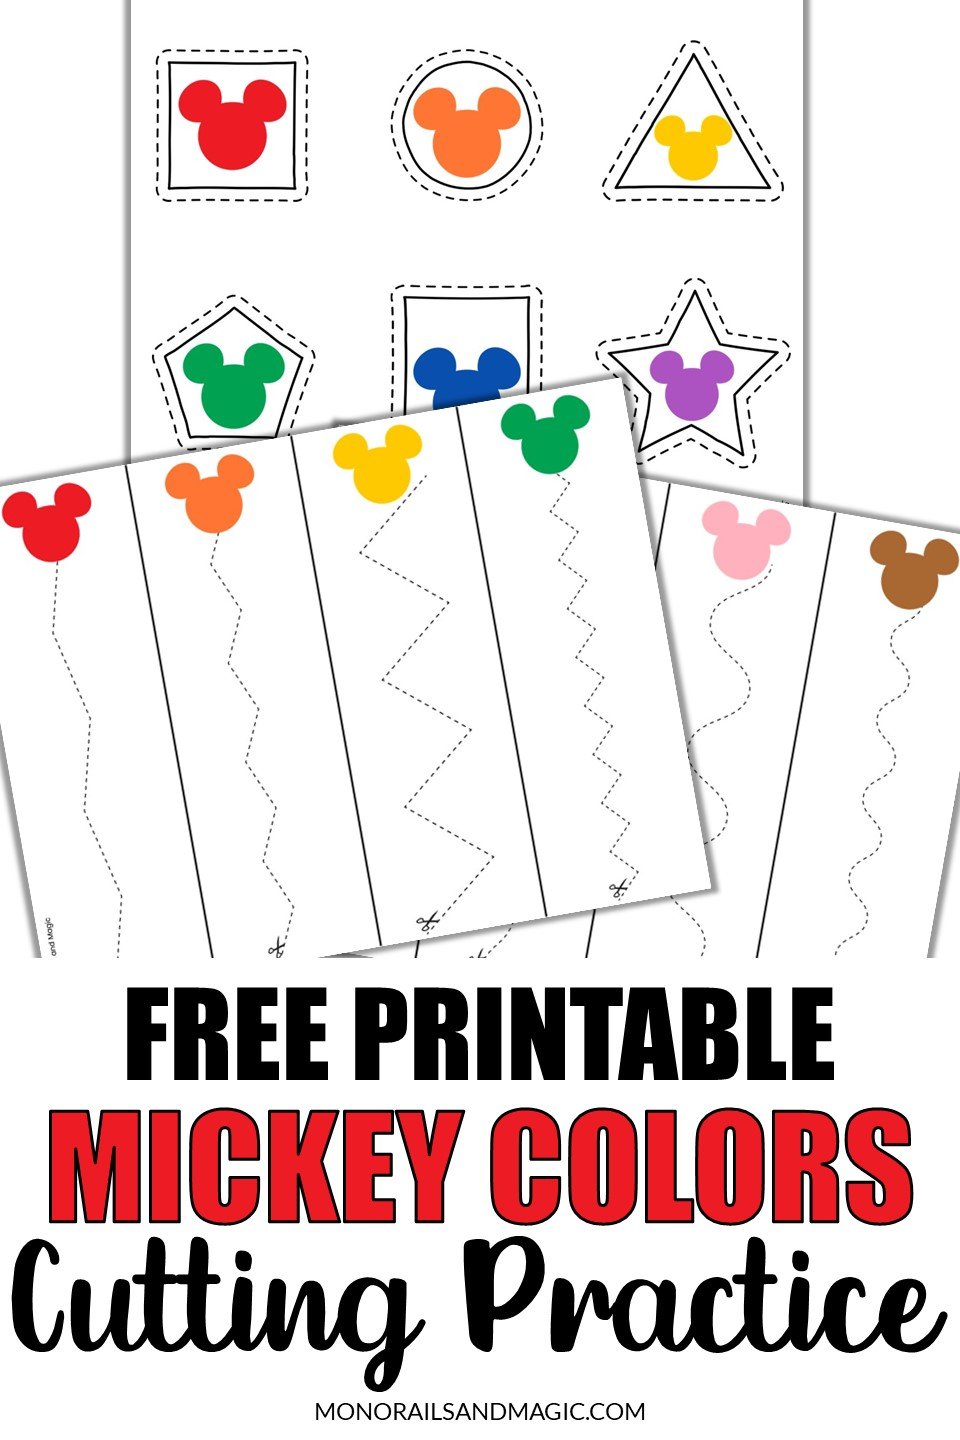 Free printable Mickey colors cutting practice pages for kids.